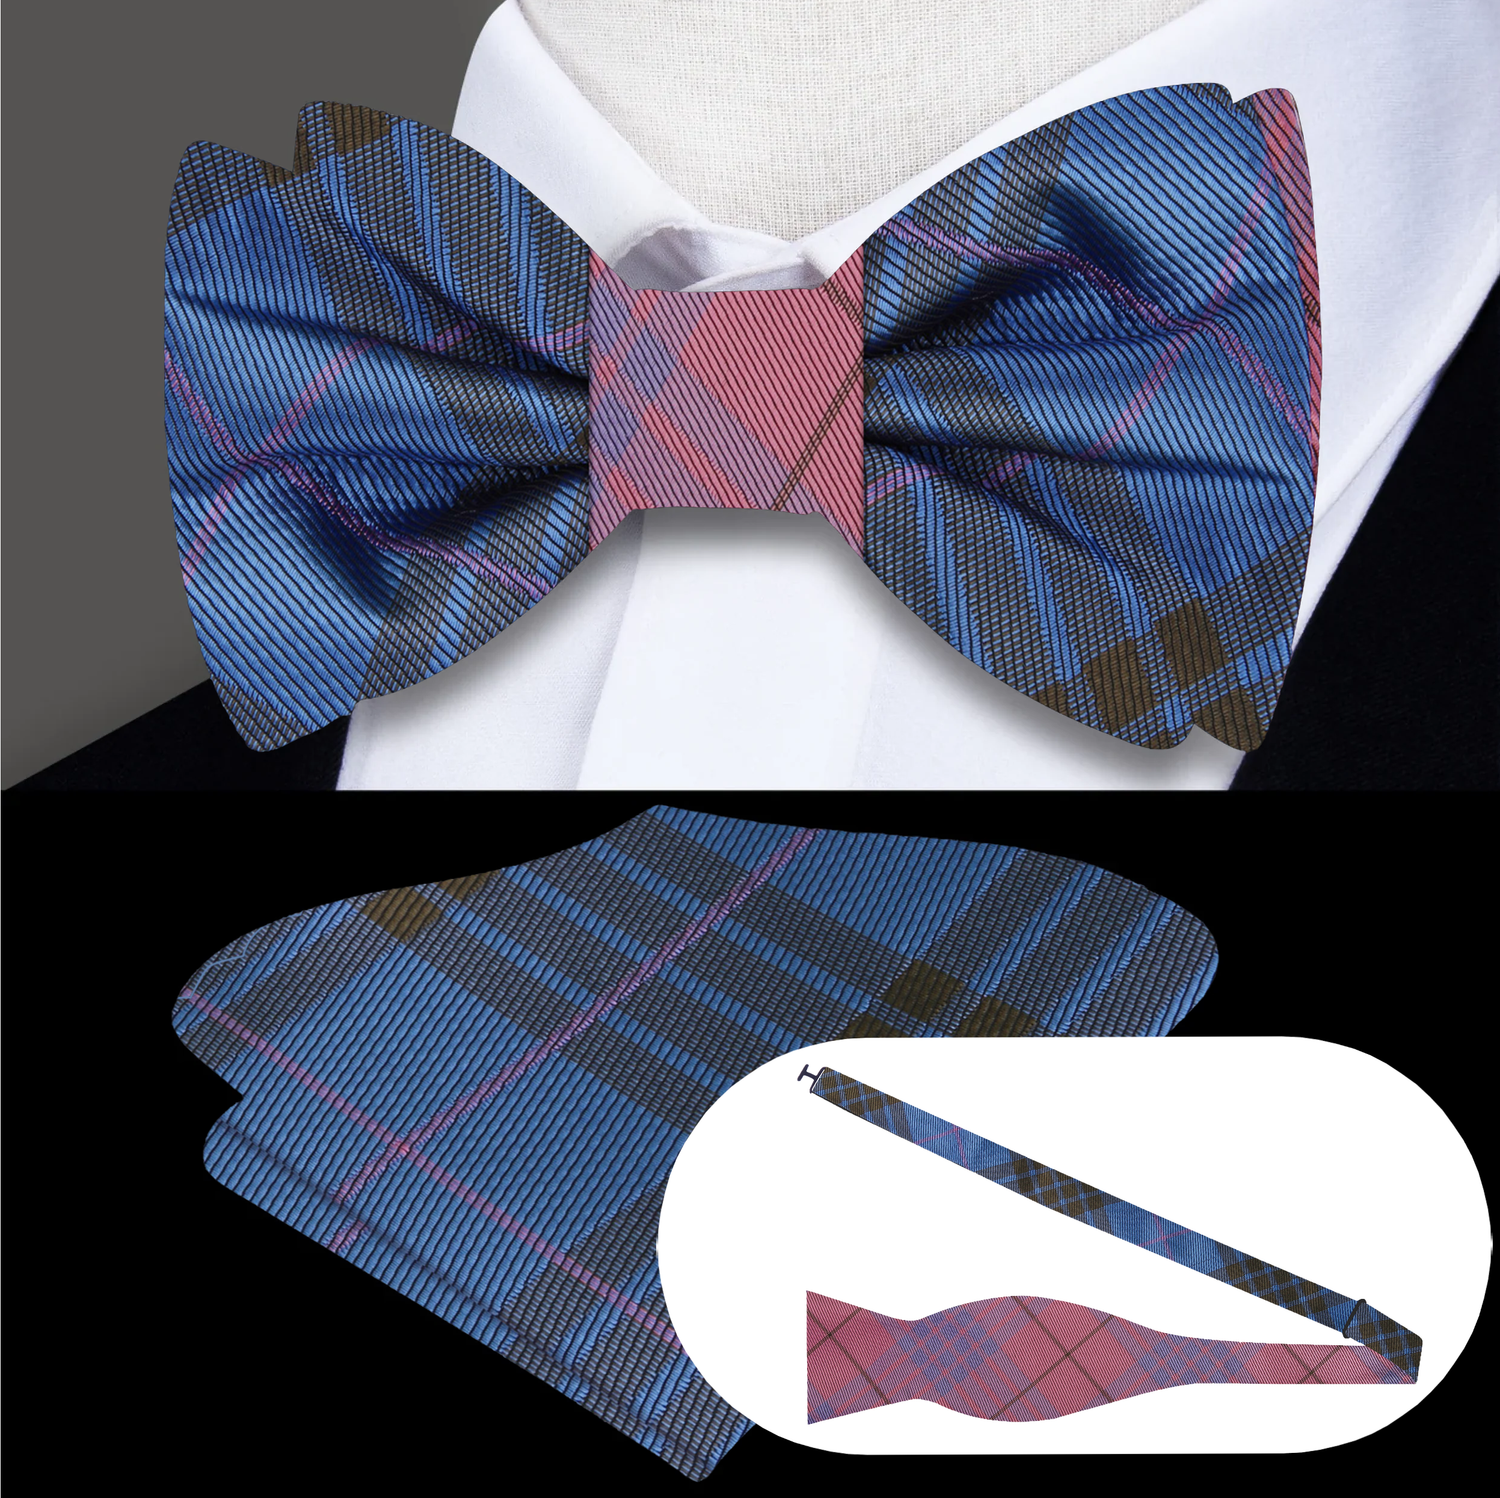 Blue, pink and brown double sided plaid bow tie and pocket square